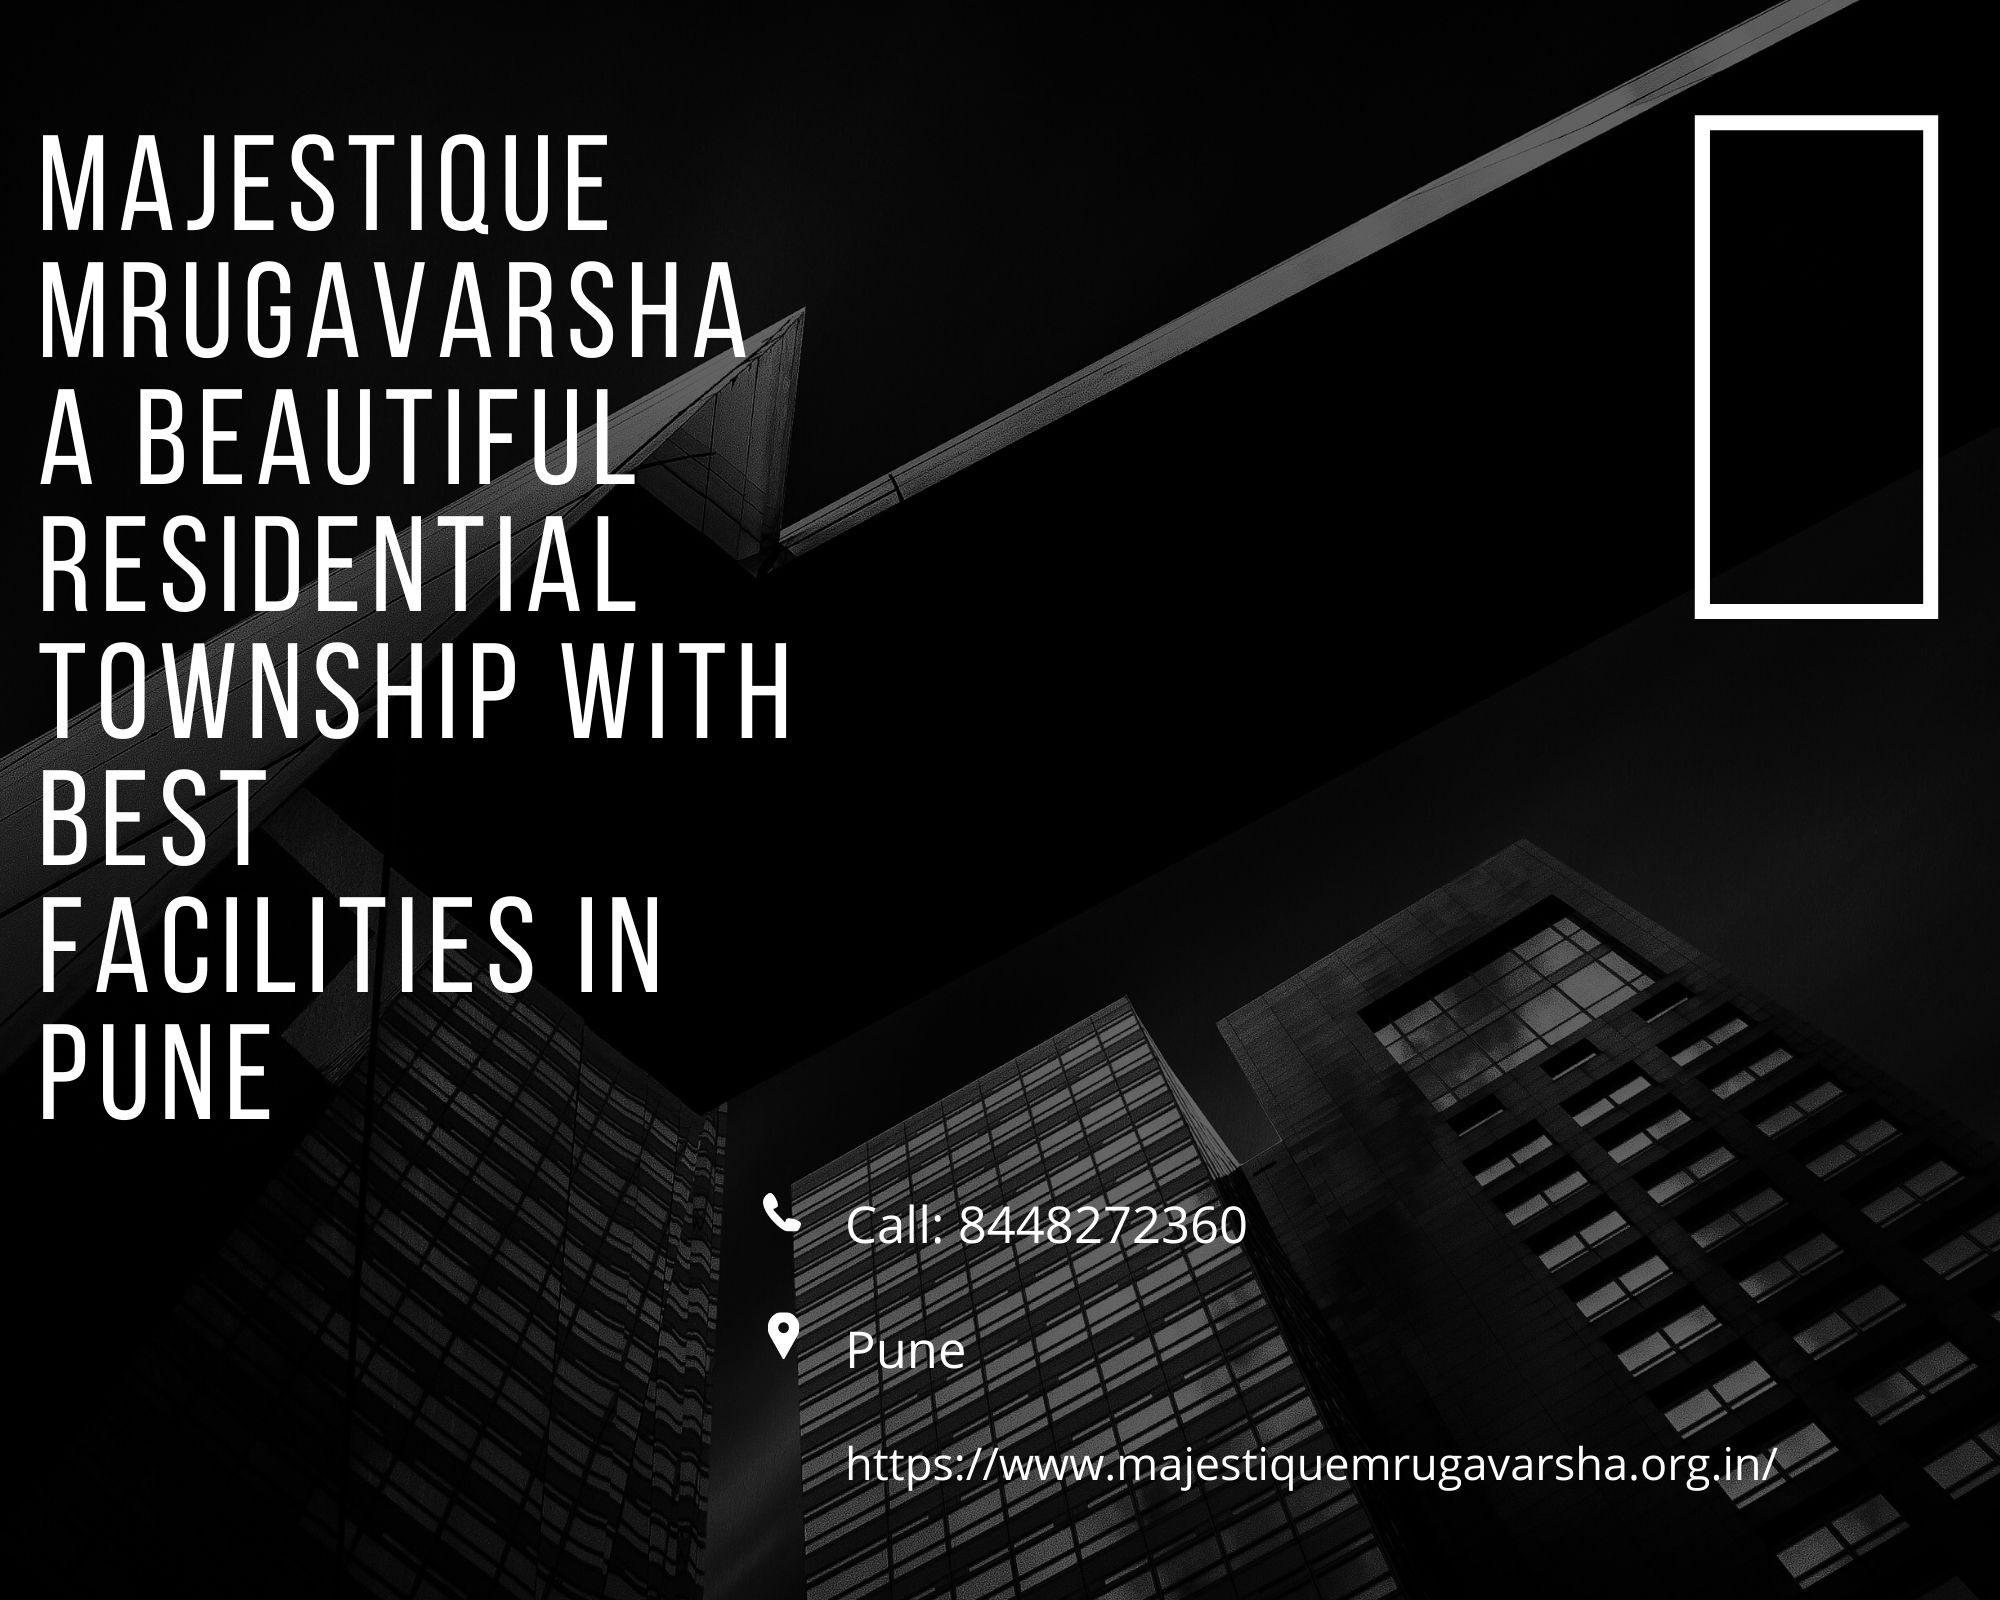 Majestique Mrugavarsha - a beautiful residential township with best facilities in Pune